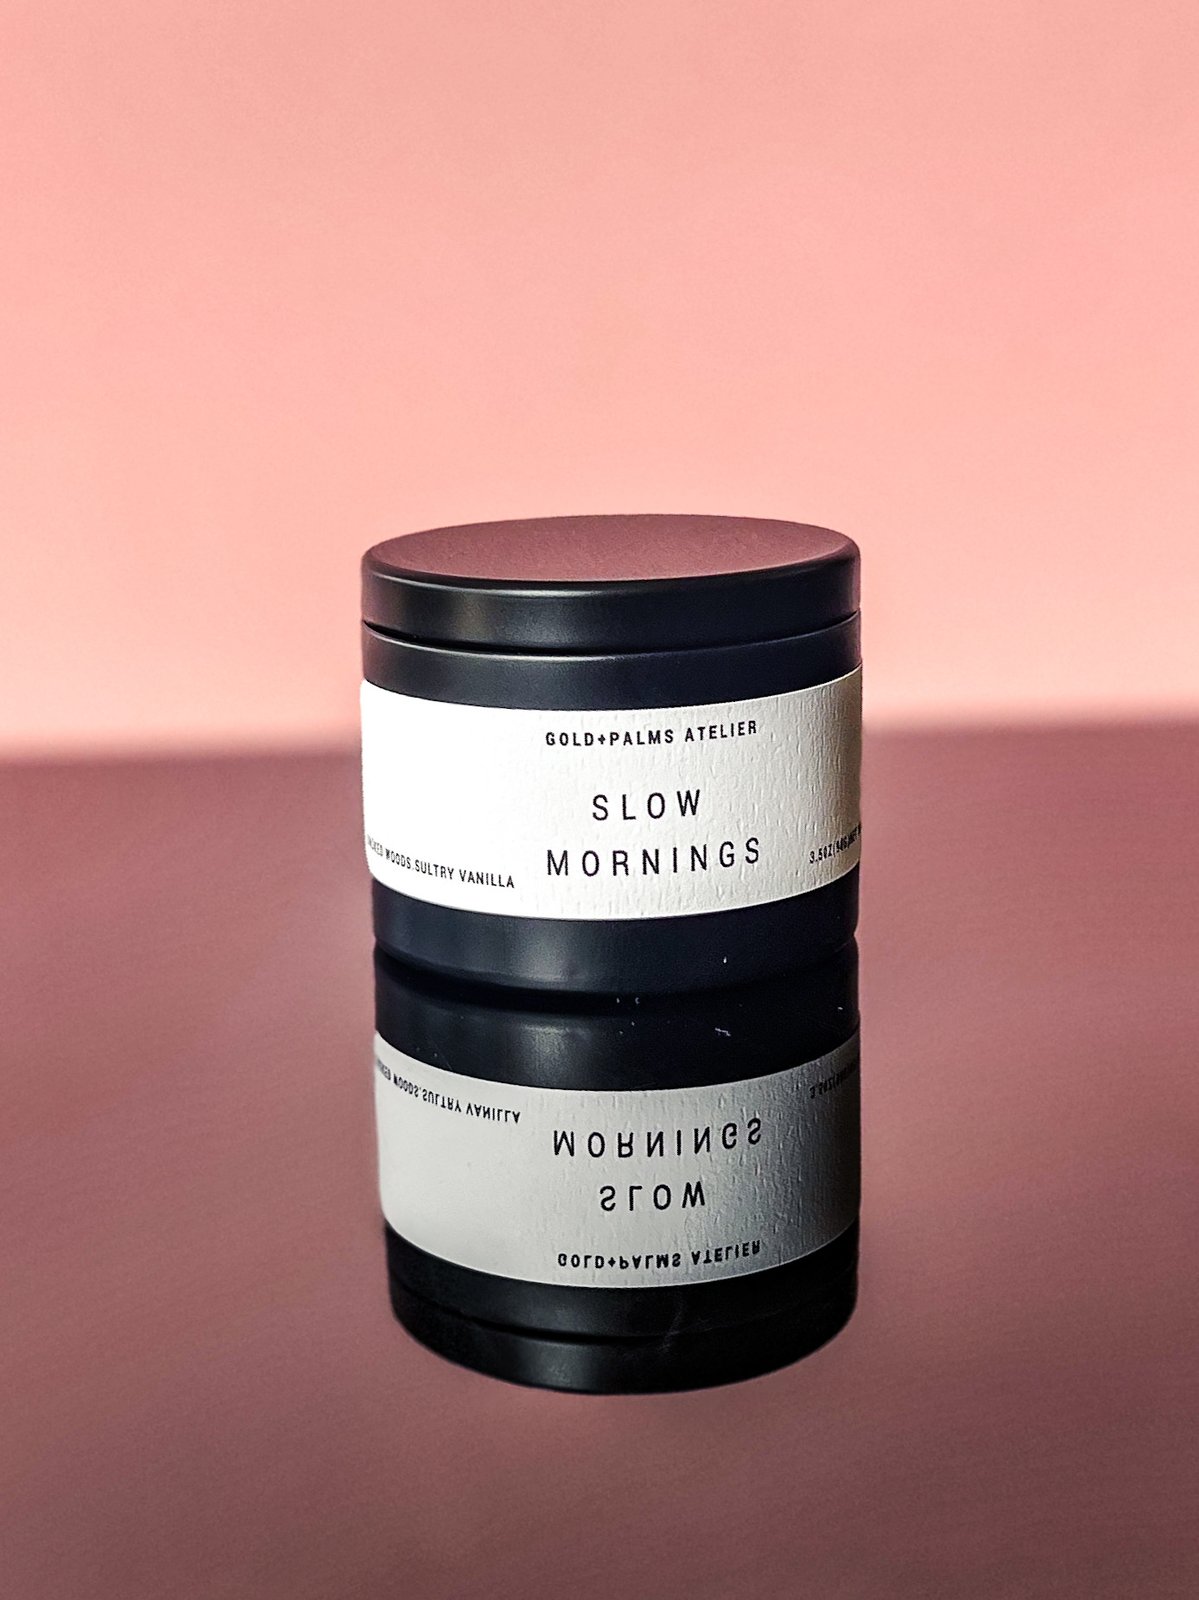 Slow mornings soy wax travel tin candle 